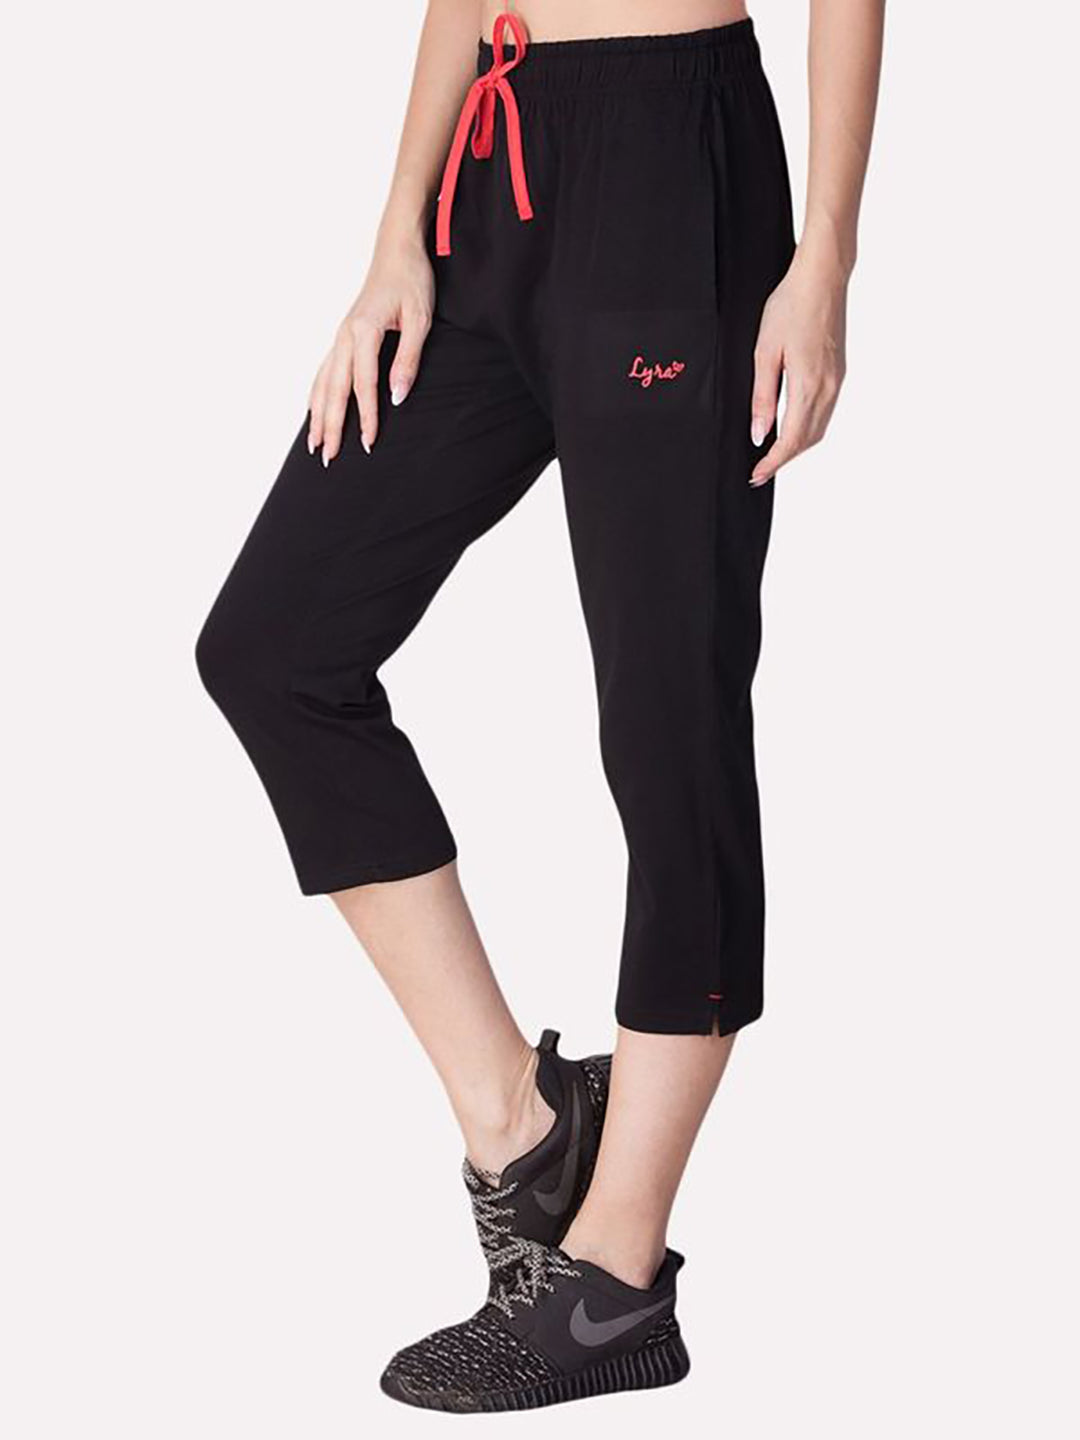 Nine Track Pants Trousers Suits Lounge - Buy Nine Track Pants Trousers  Suits Lounge online in India